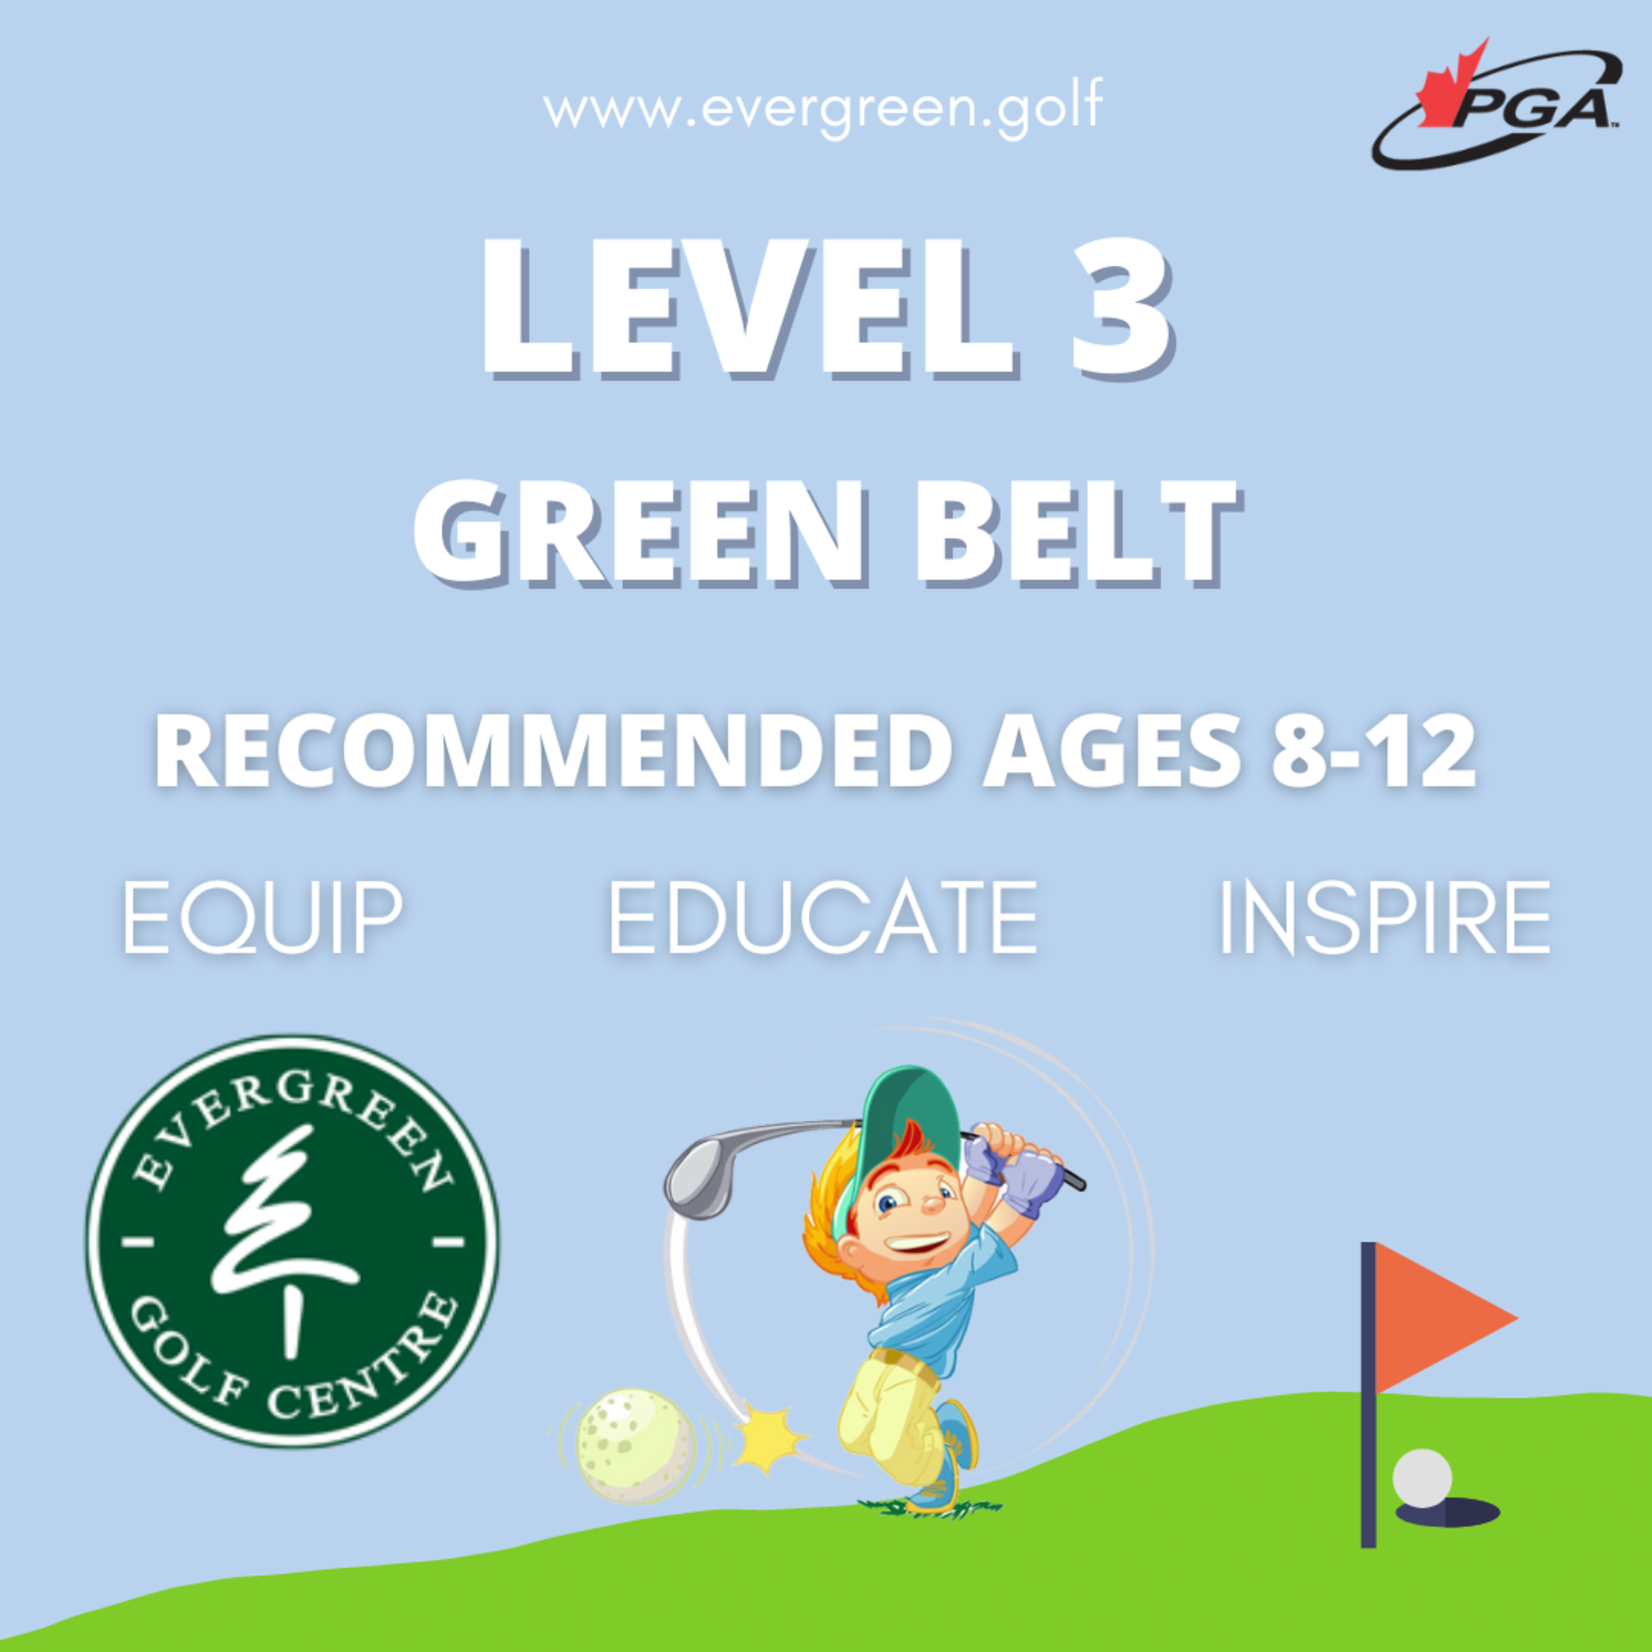 2022 Kick-In Level 3 Green Belt Ages 8-12 Wednesdays June 8,15,22,29 4:30-5:30pm